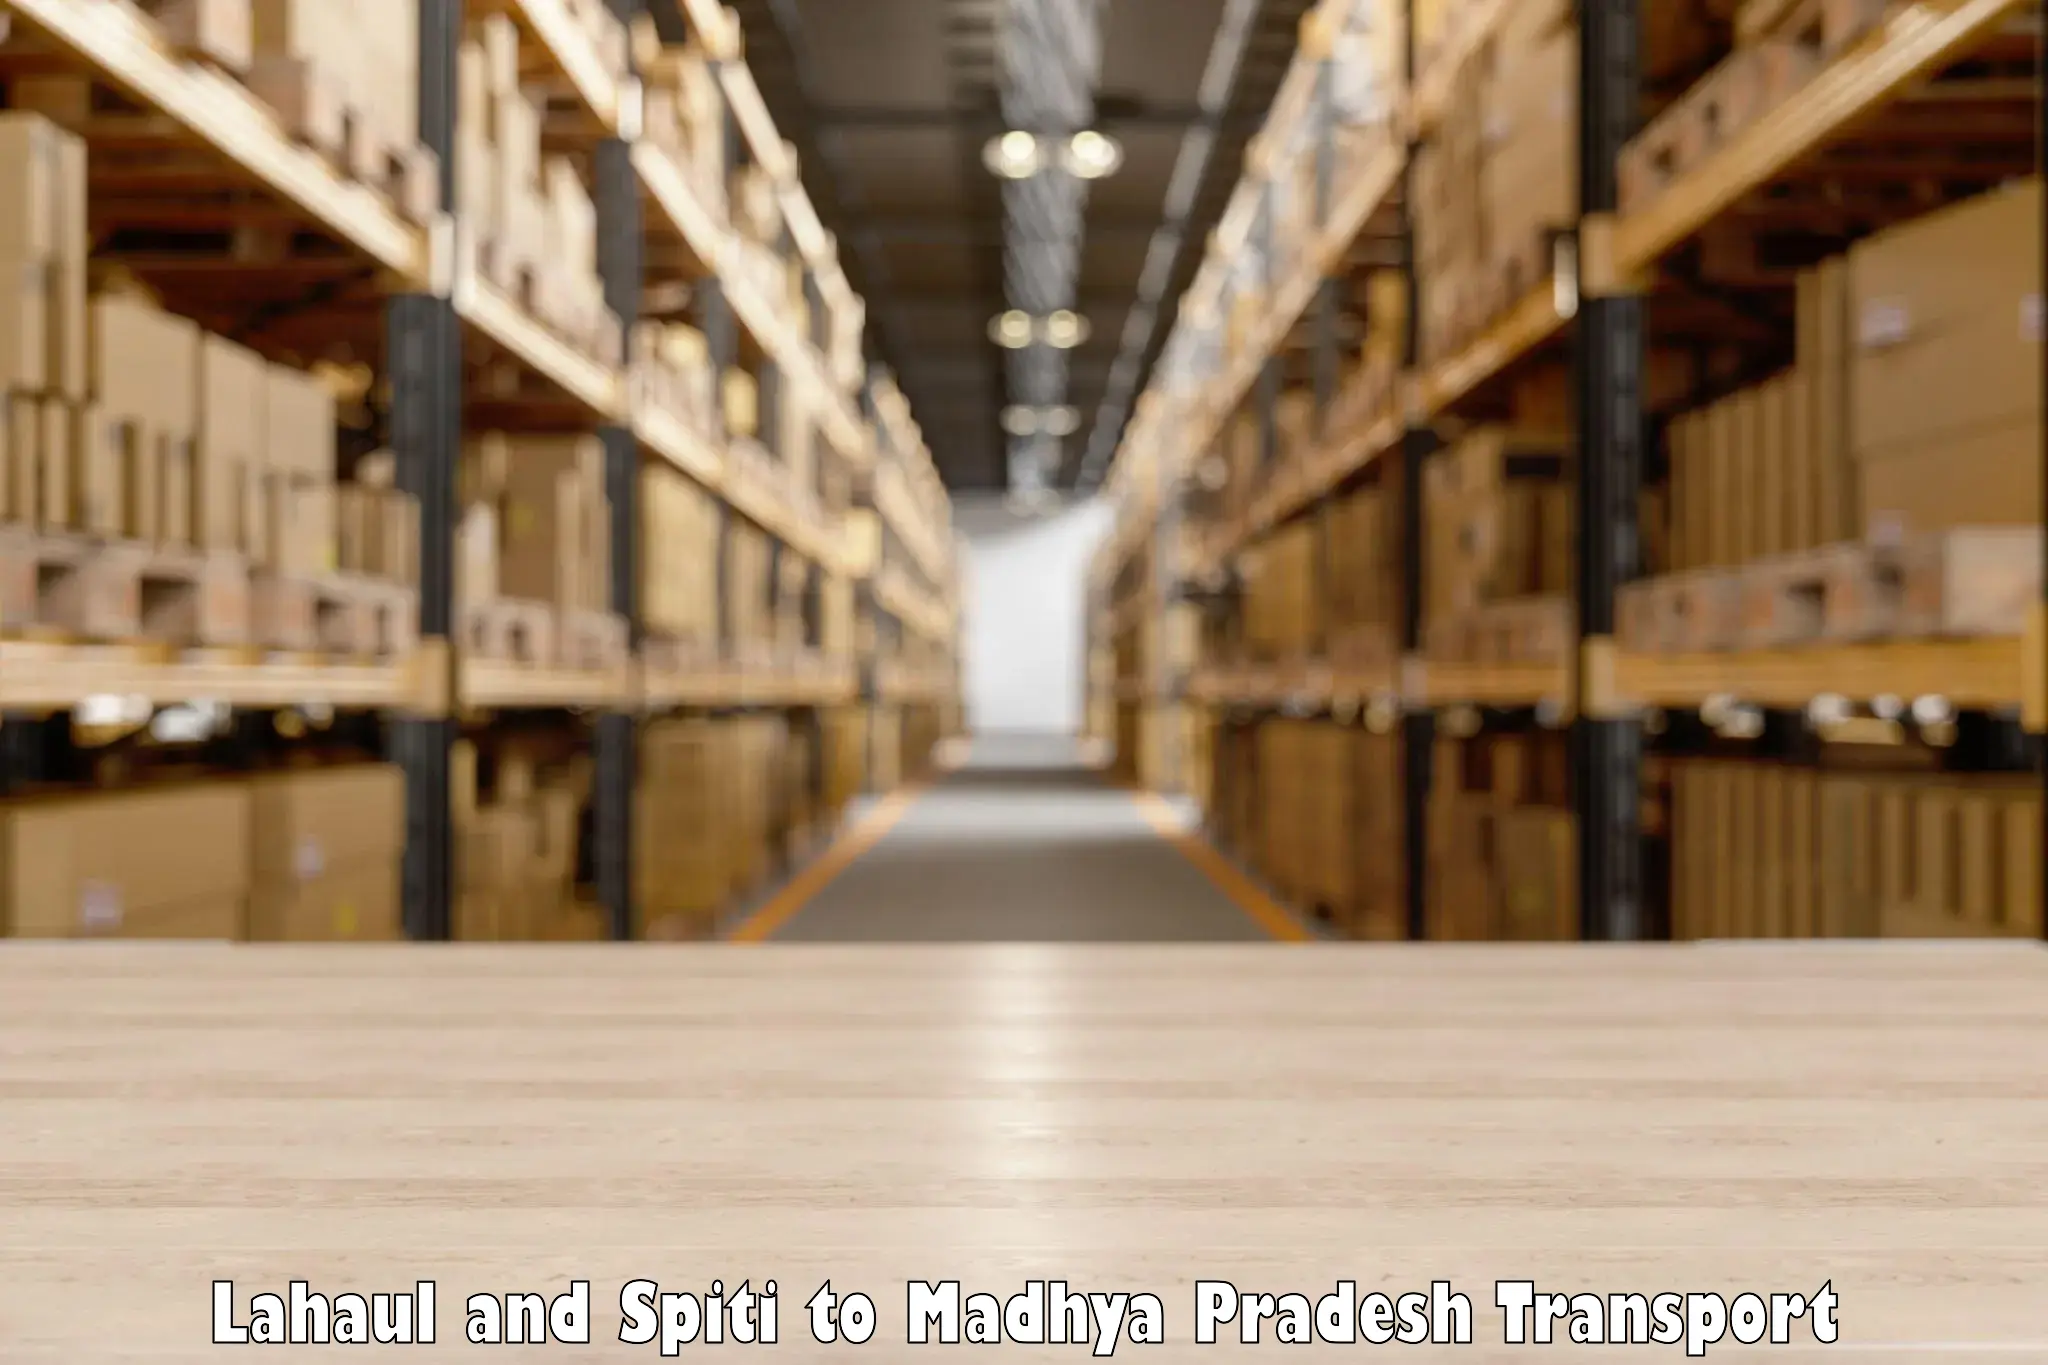 Daily parcel service transport Lahaul and Spiti to Pawai